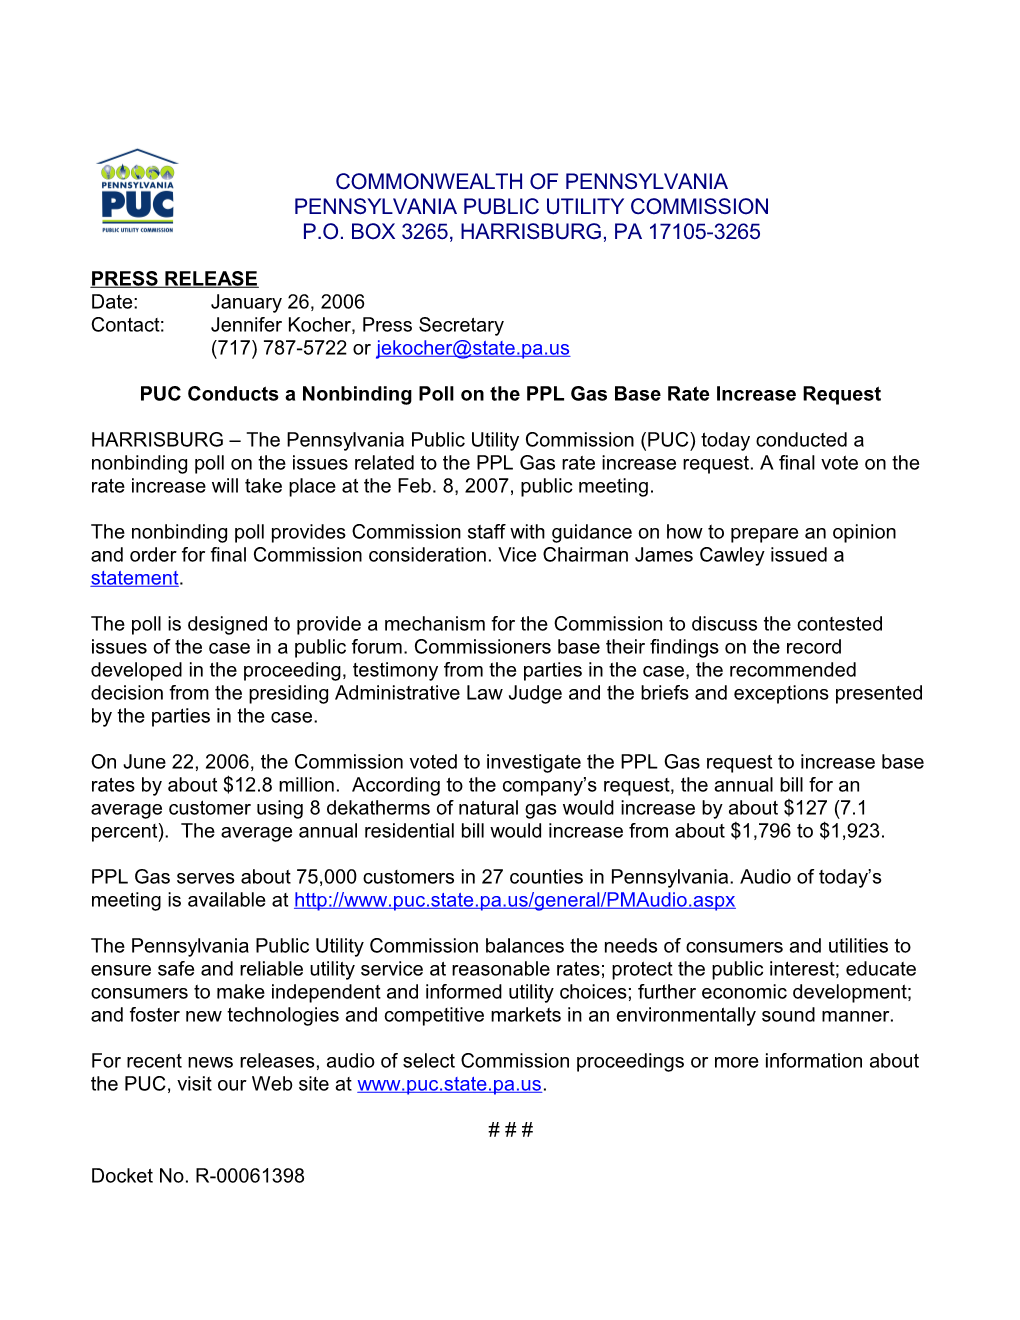 PUC Conducts a Nonbinding Poll on the PPL Gas Base Rate Increase Request